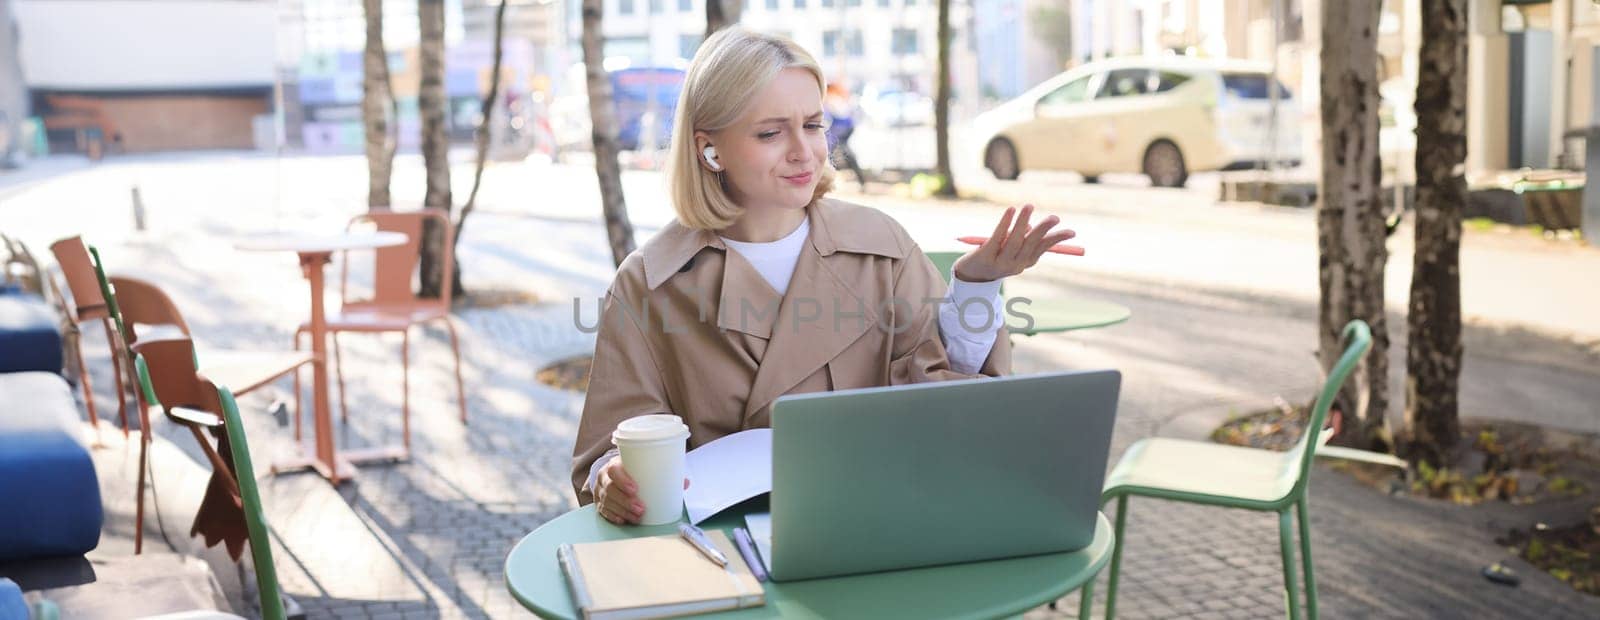 Image of young woman with puzzled face, looking at laptop in wireless headphones, confused while listening to lecture or online speaker, attend web course while sitting in outdoor cafe.